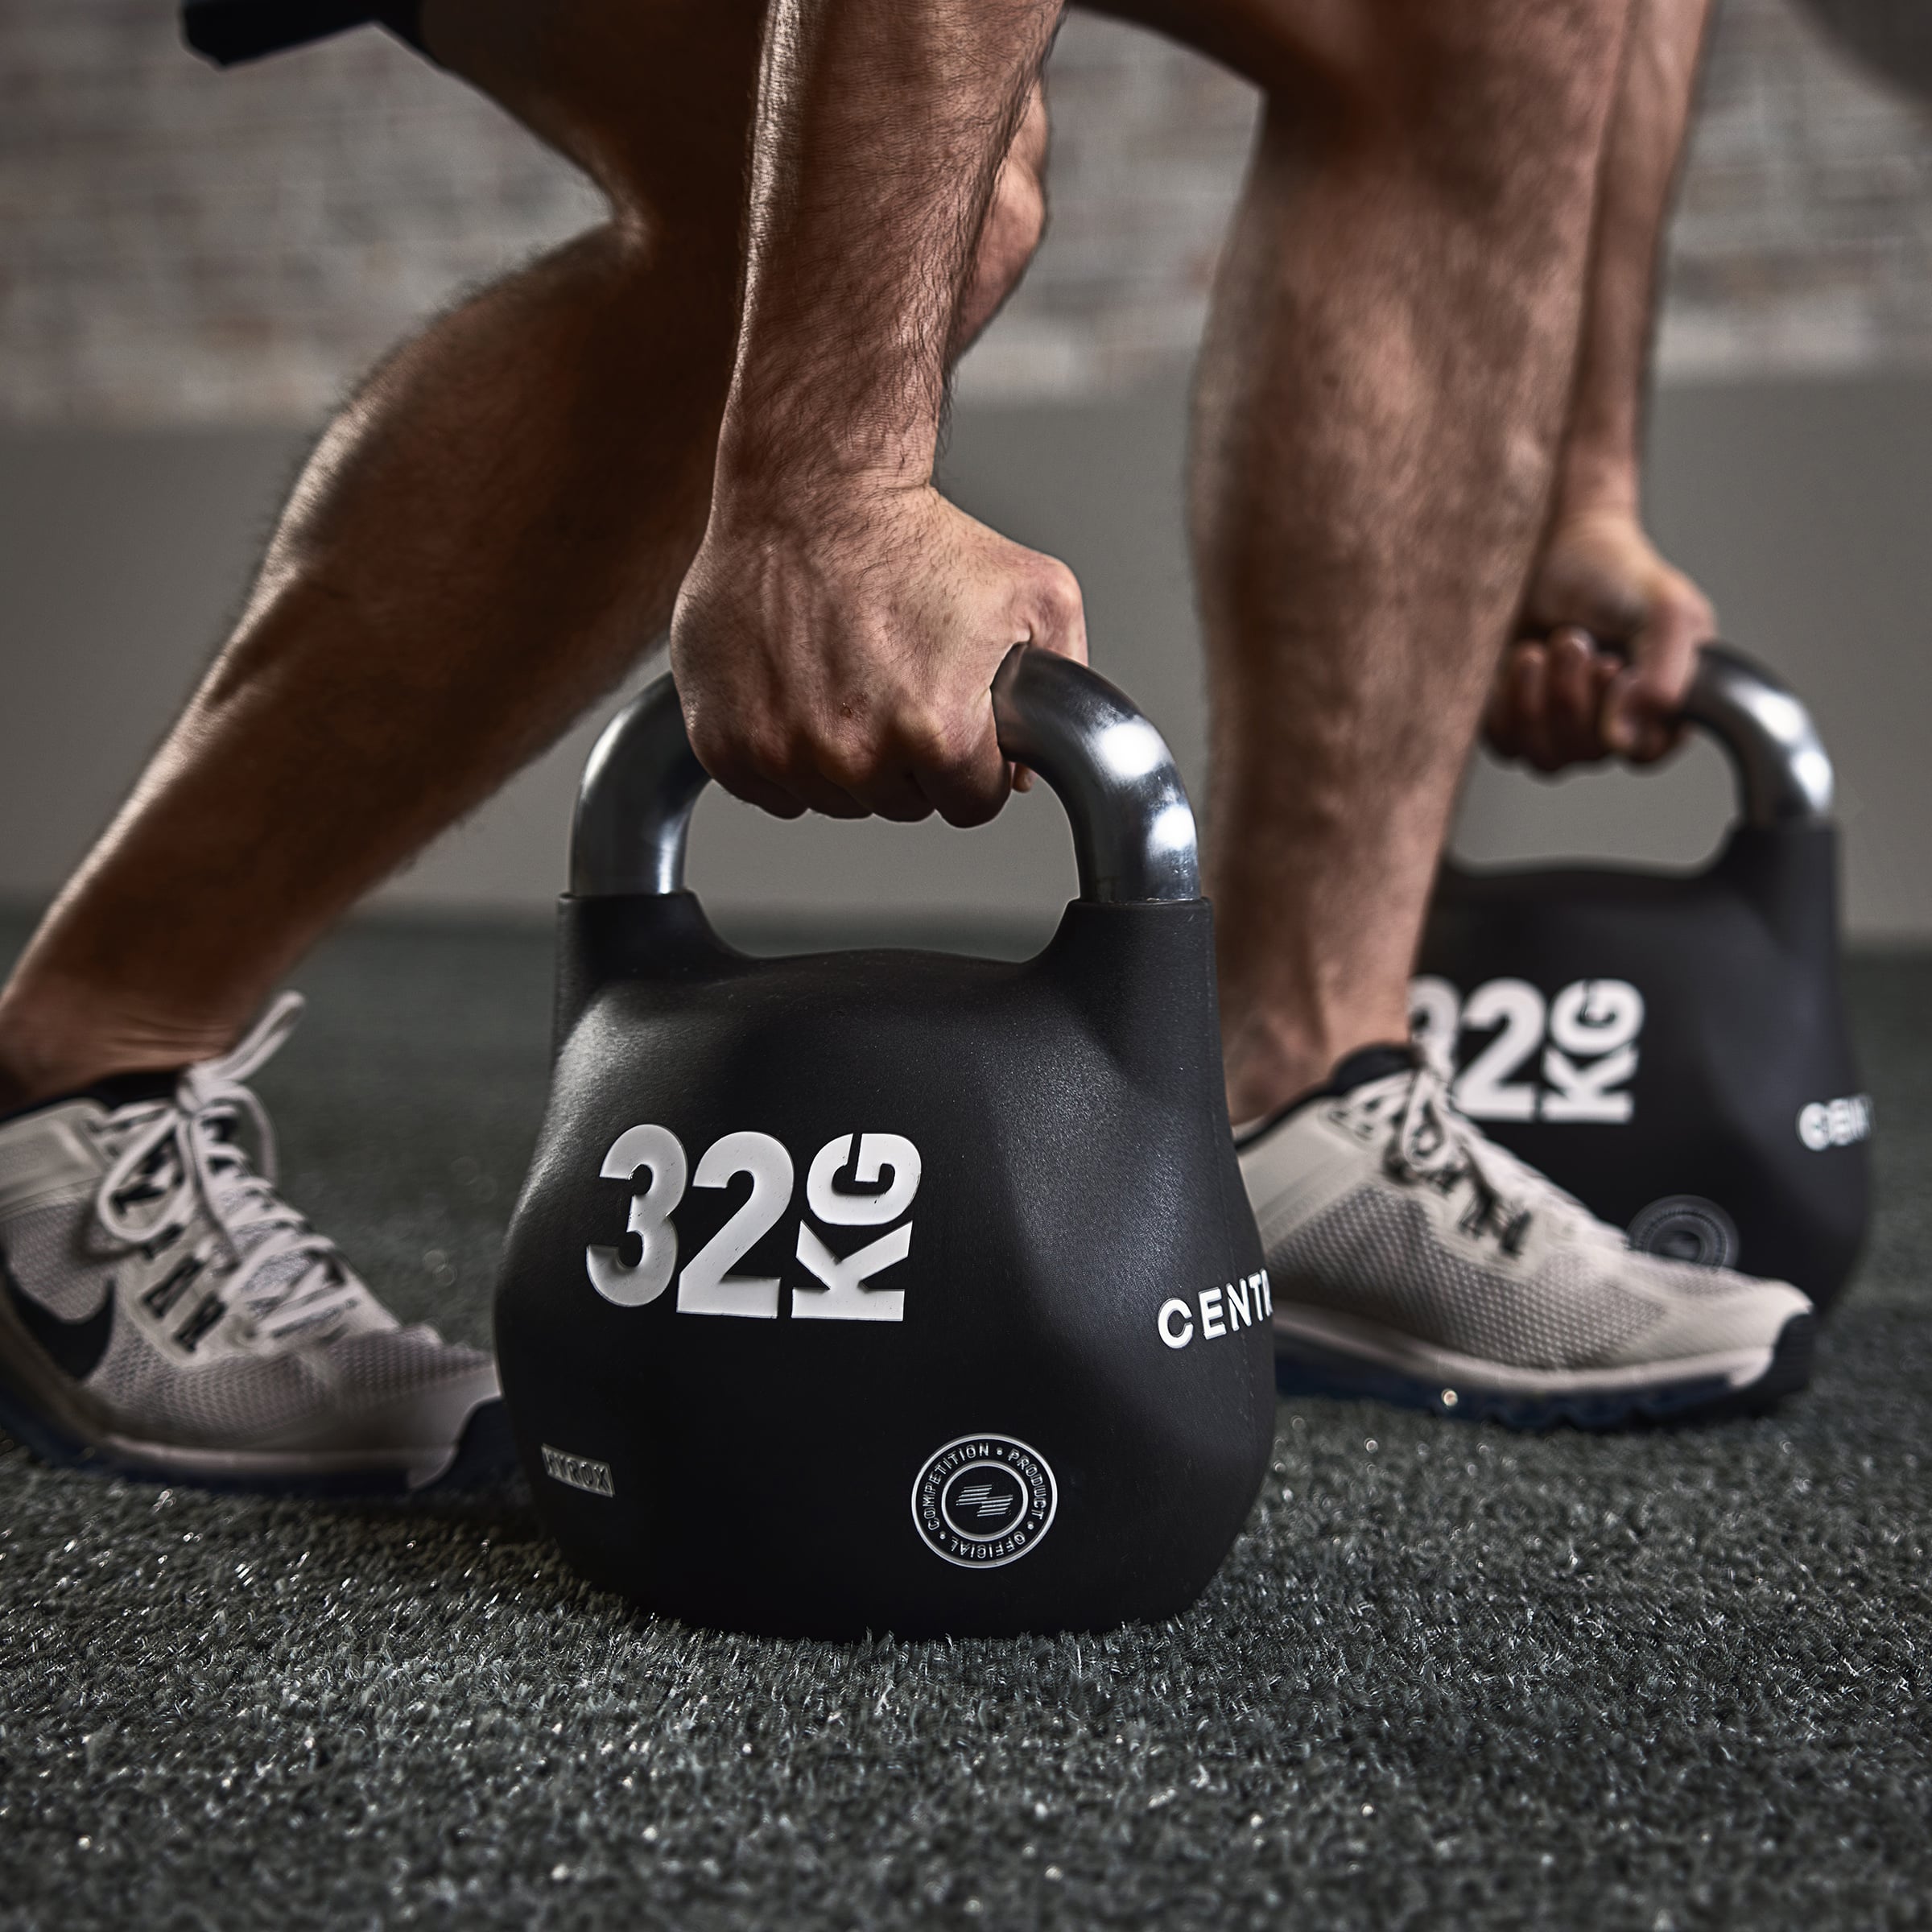 CENTR x HYROX Competition Octo Kettlebells (SHIPPING EARLY MAY)